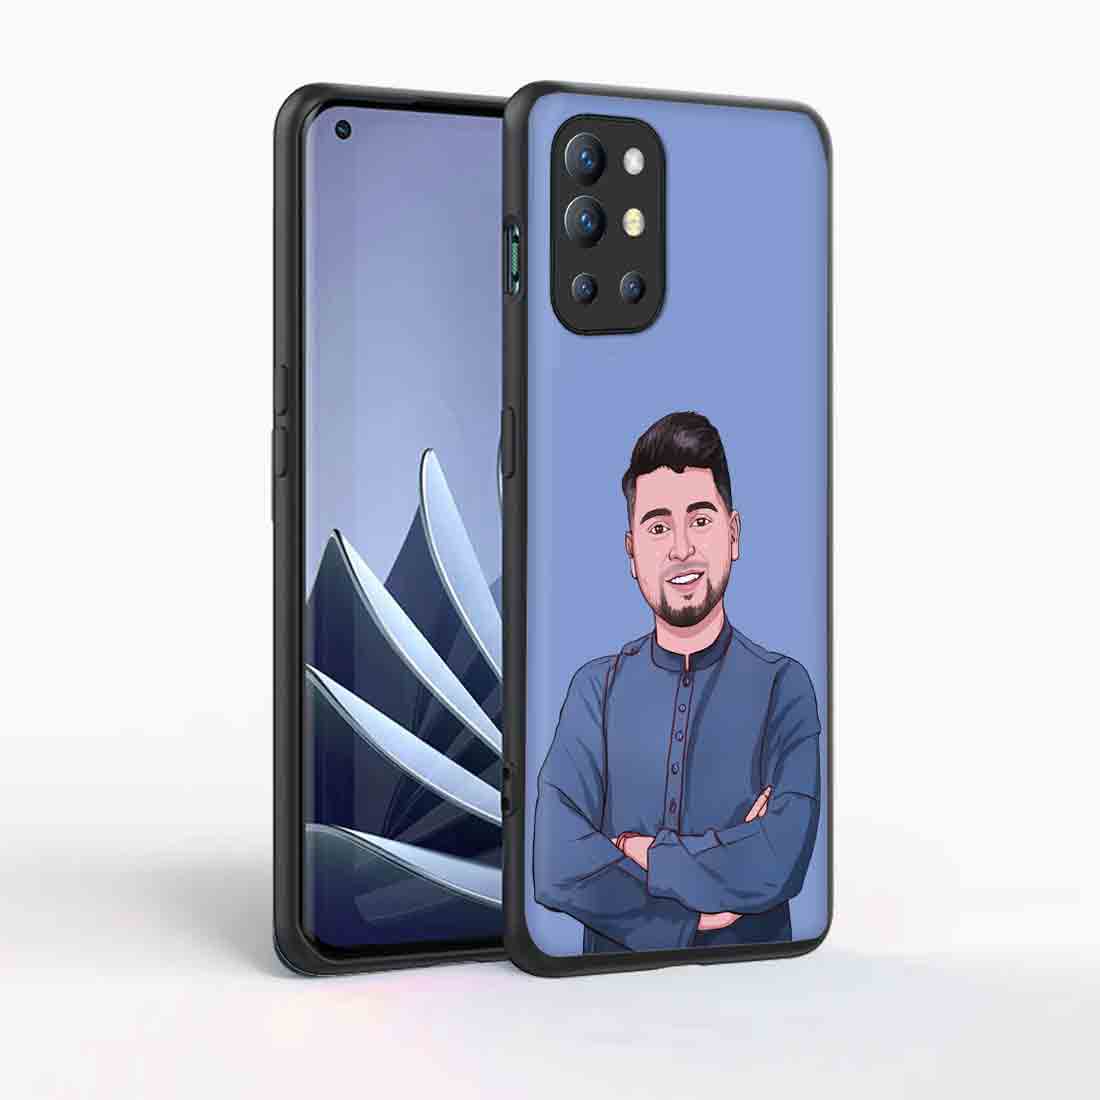 DSQUARE OnePlus 9 Pro Back Cover Case | 360 Degree Protection | Protective  Design | Transparent